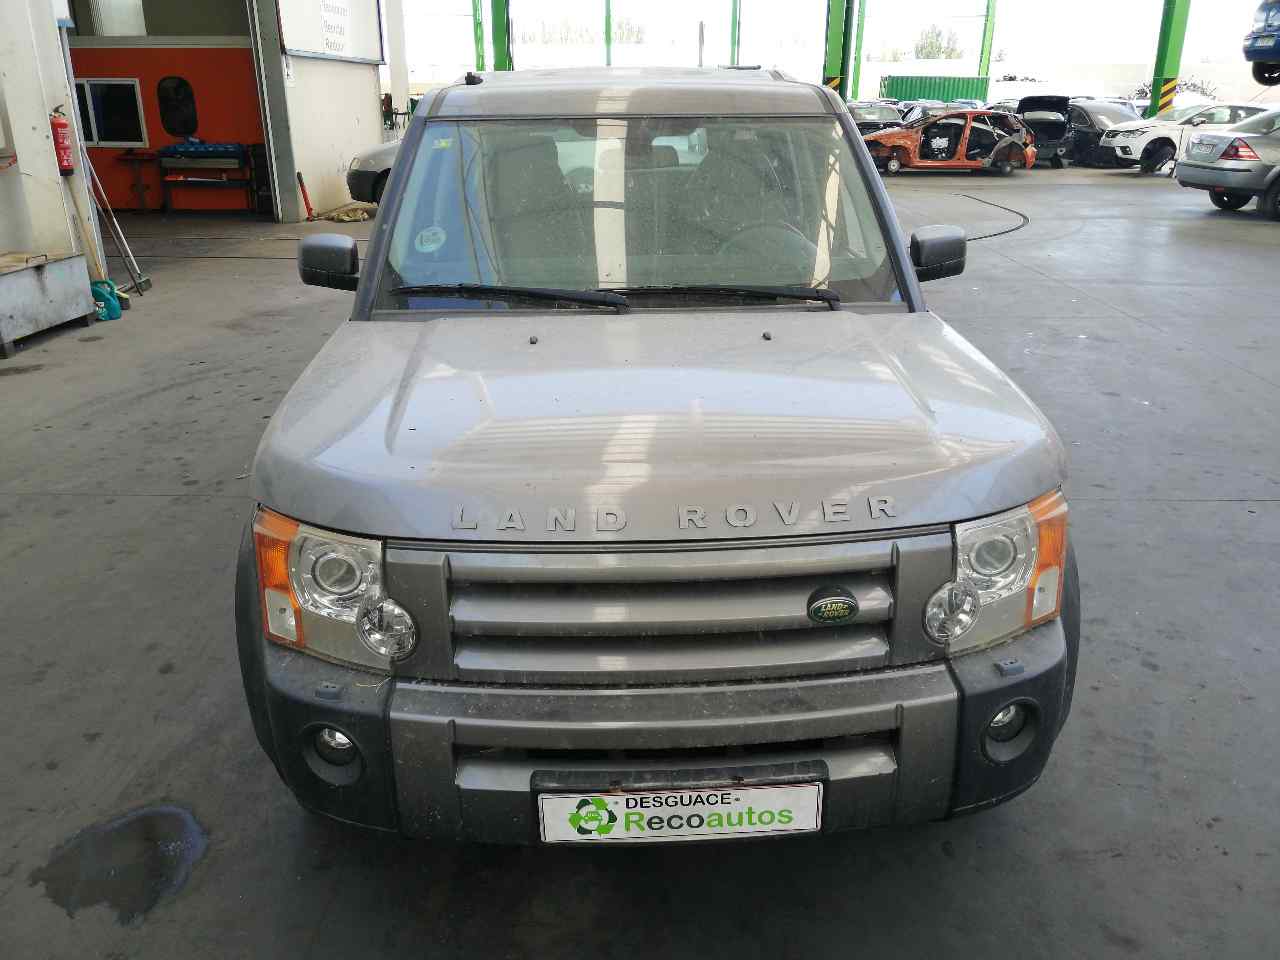 LAND ROVER Discovery 4 generation (2009-2016) Части моторного отсека KKB500441G, 3618398125 19826370